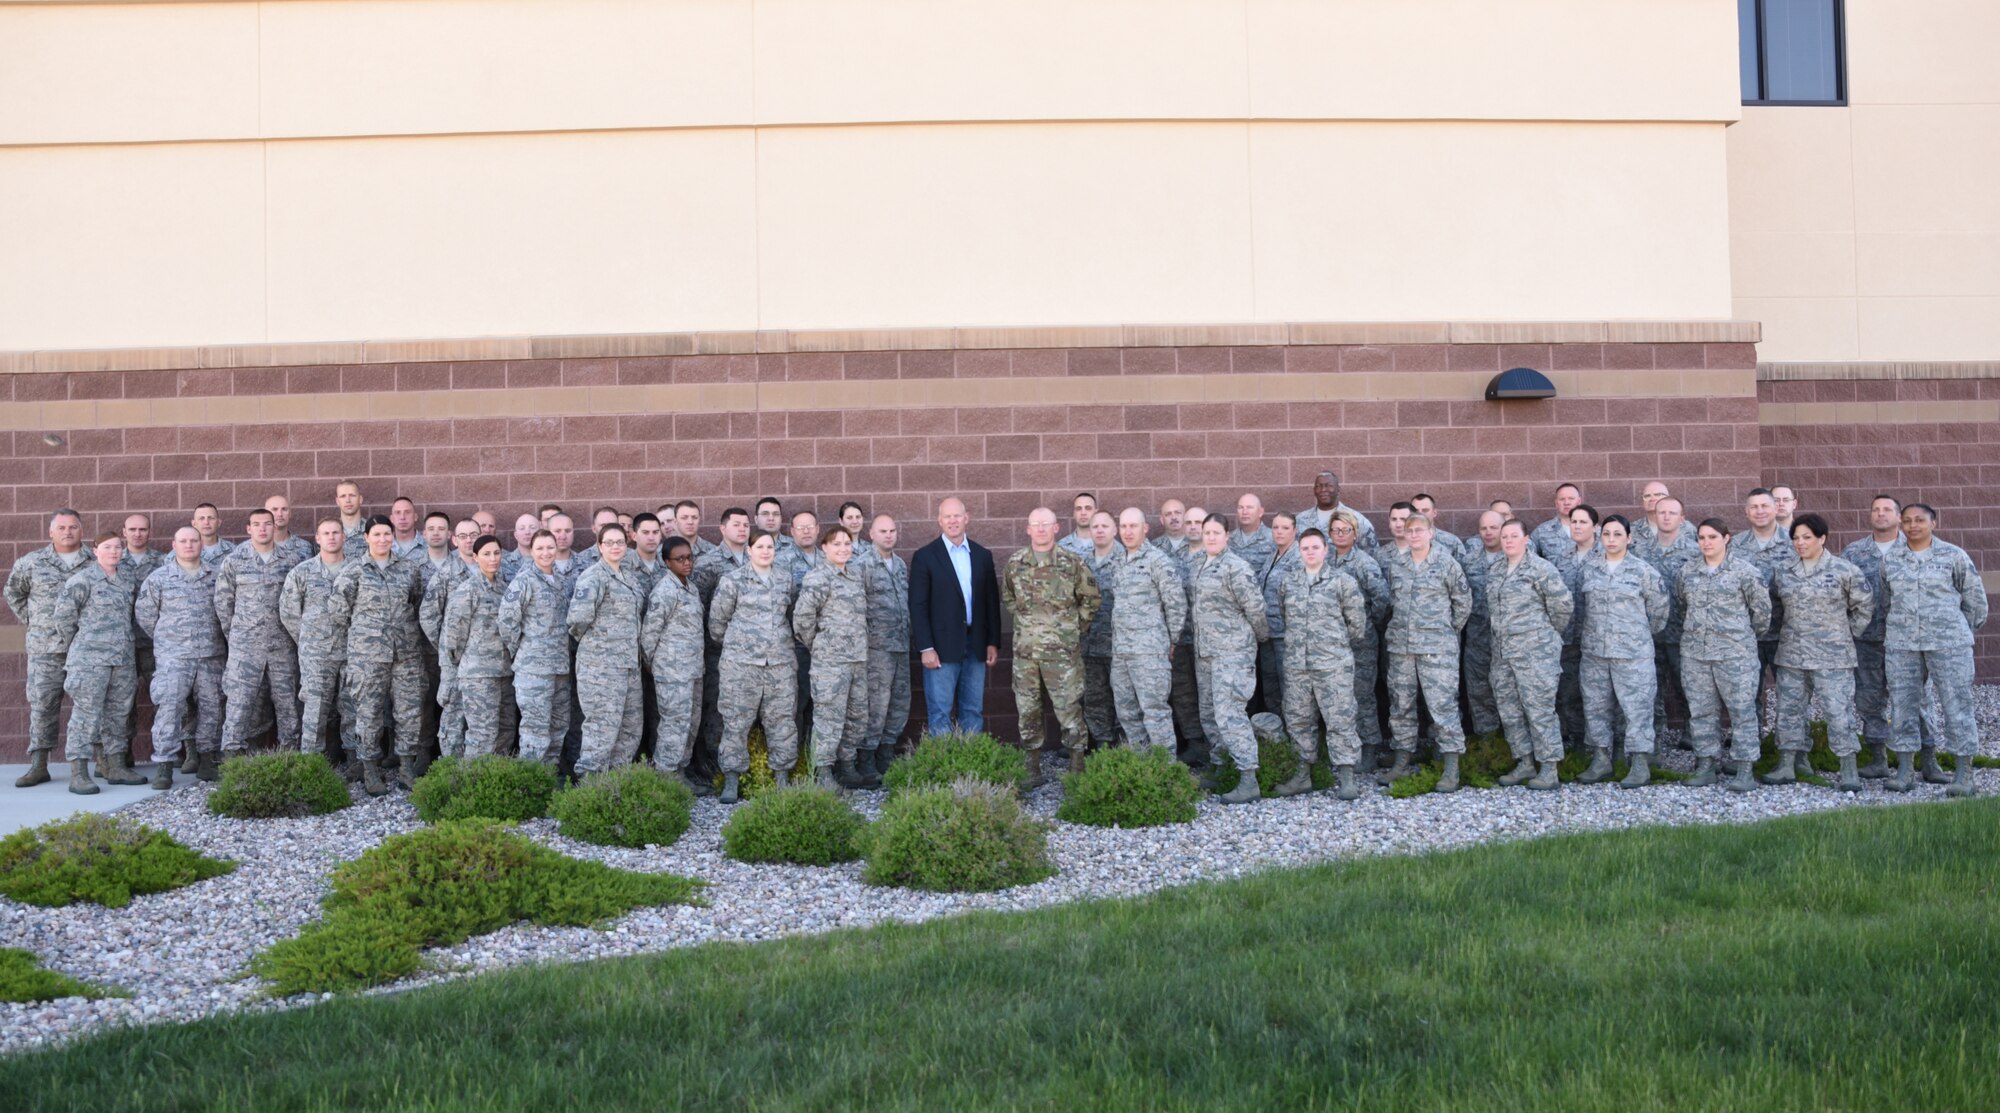 Deploying airmen from the 153rd Airlift Wing, Wyoming Air National Guard, pose for a photo with Wyoming Gov. Matt Mead and Wyoming Adjutant General, Maj. Gen. K. Luke Reiner June 5, 2016. Mead and Reiner made it a priority to talk with these airmen prior to their upcoming deployments. (U.S. Air National Guard photo by Senior Airman Nichole Grady)